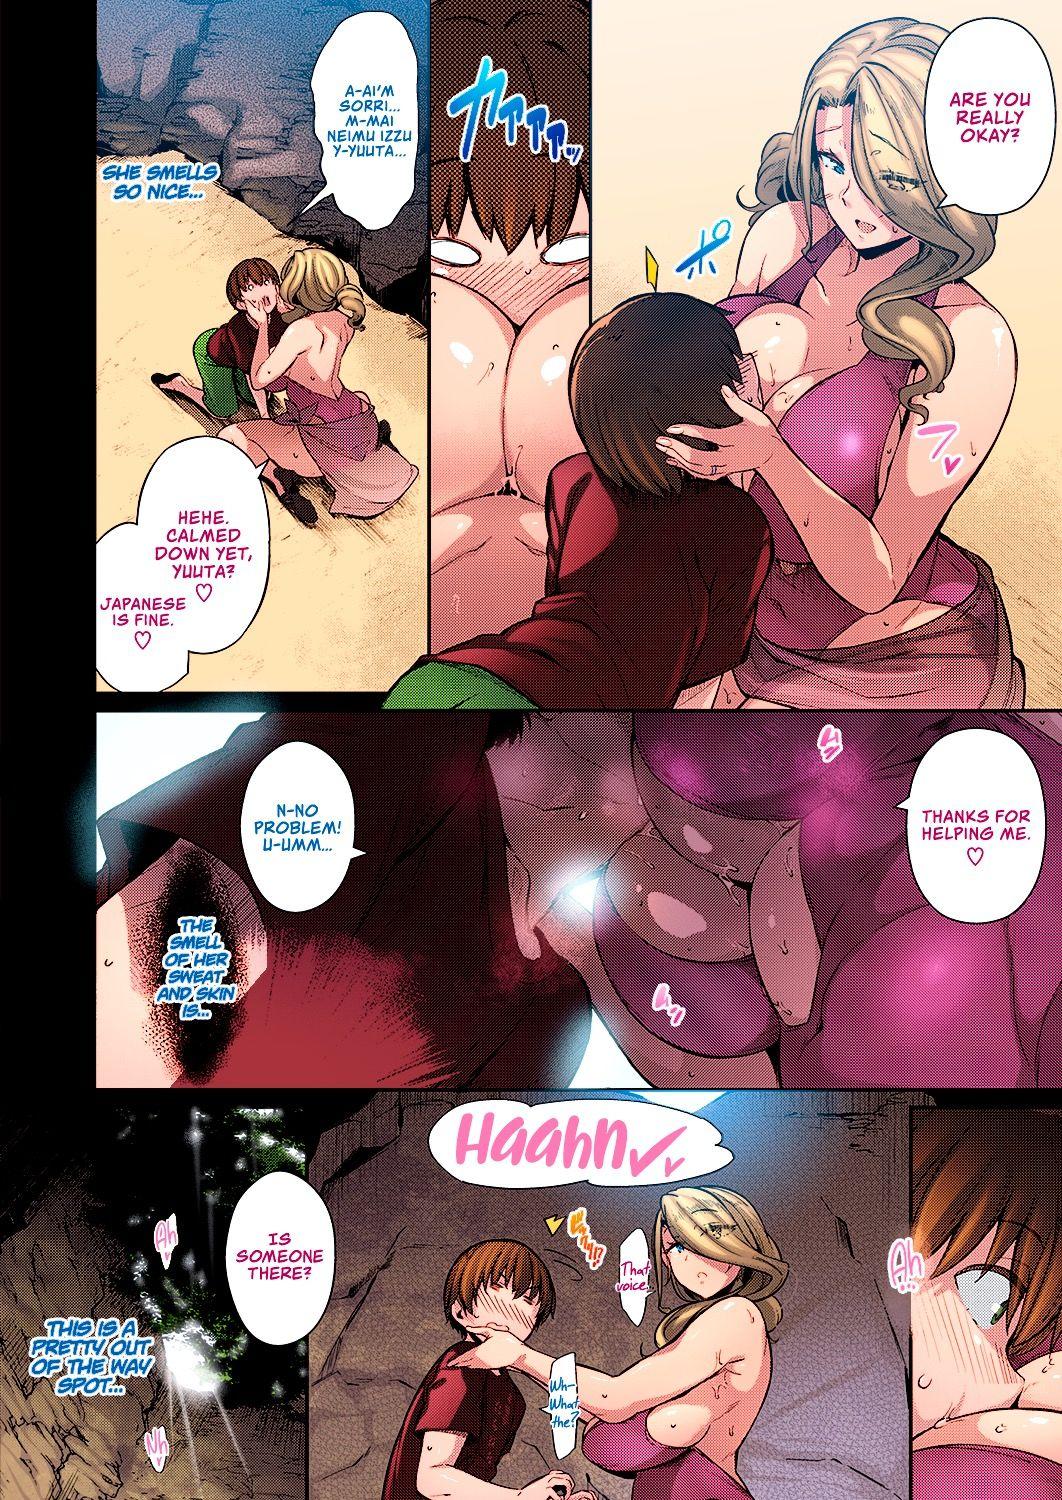 Hard Core Sex Last Summer Roughsex - Page 8